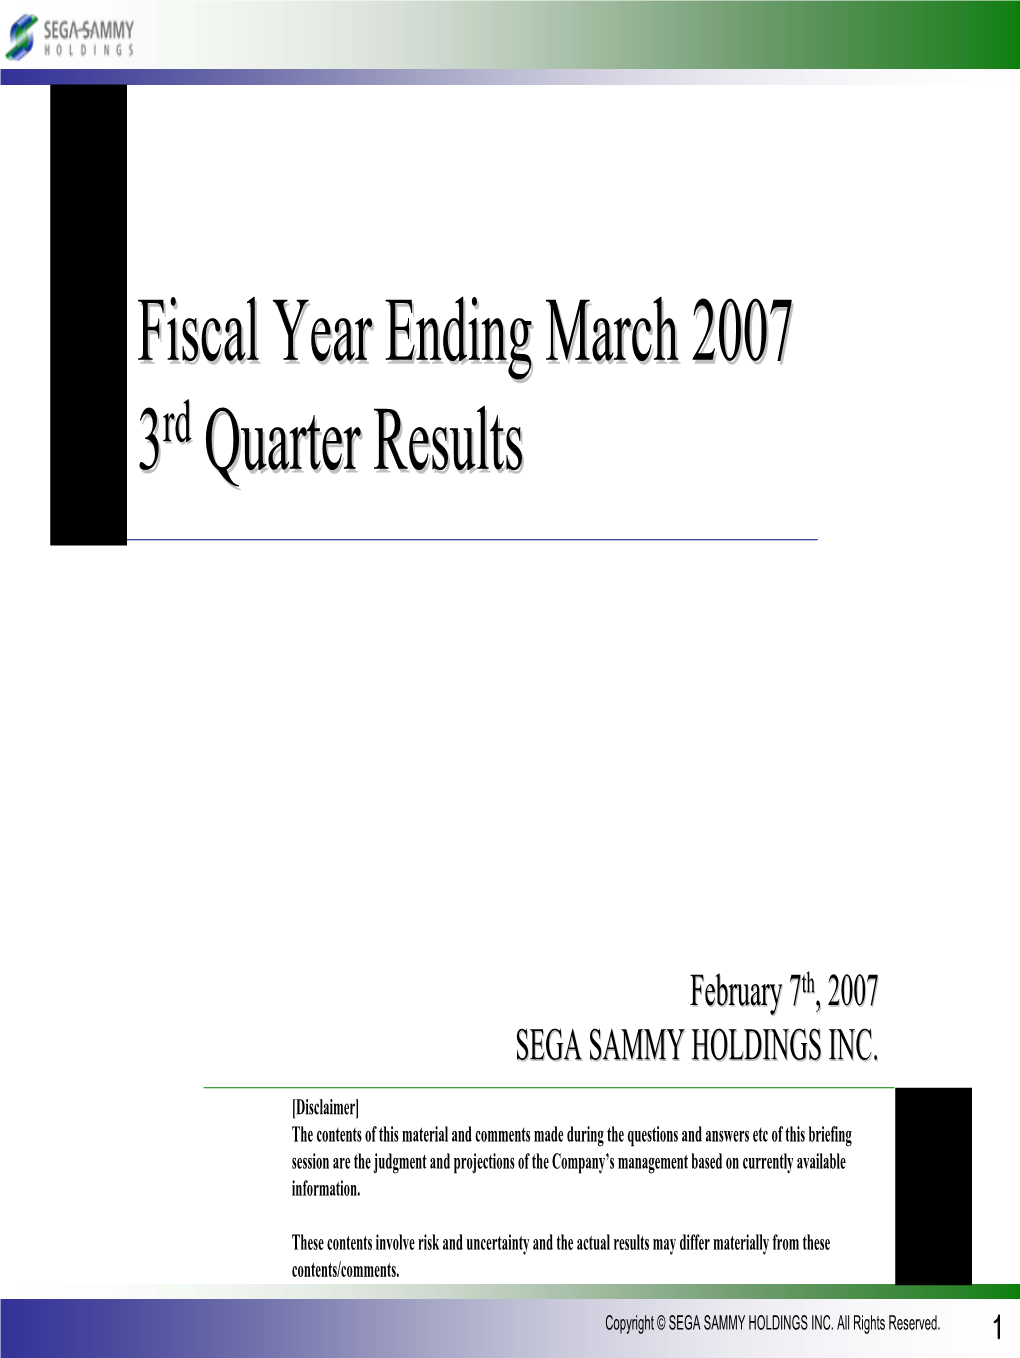 Fiscal Year Ending March 2007 3 Quarter Results